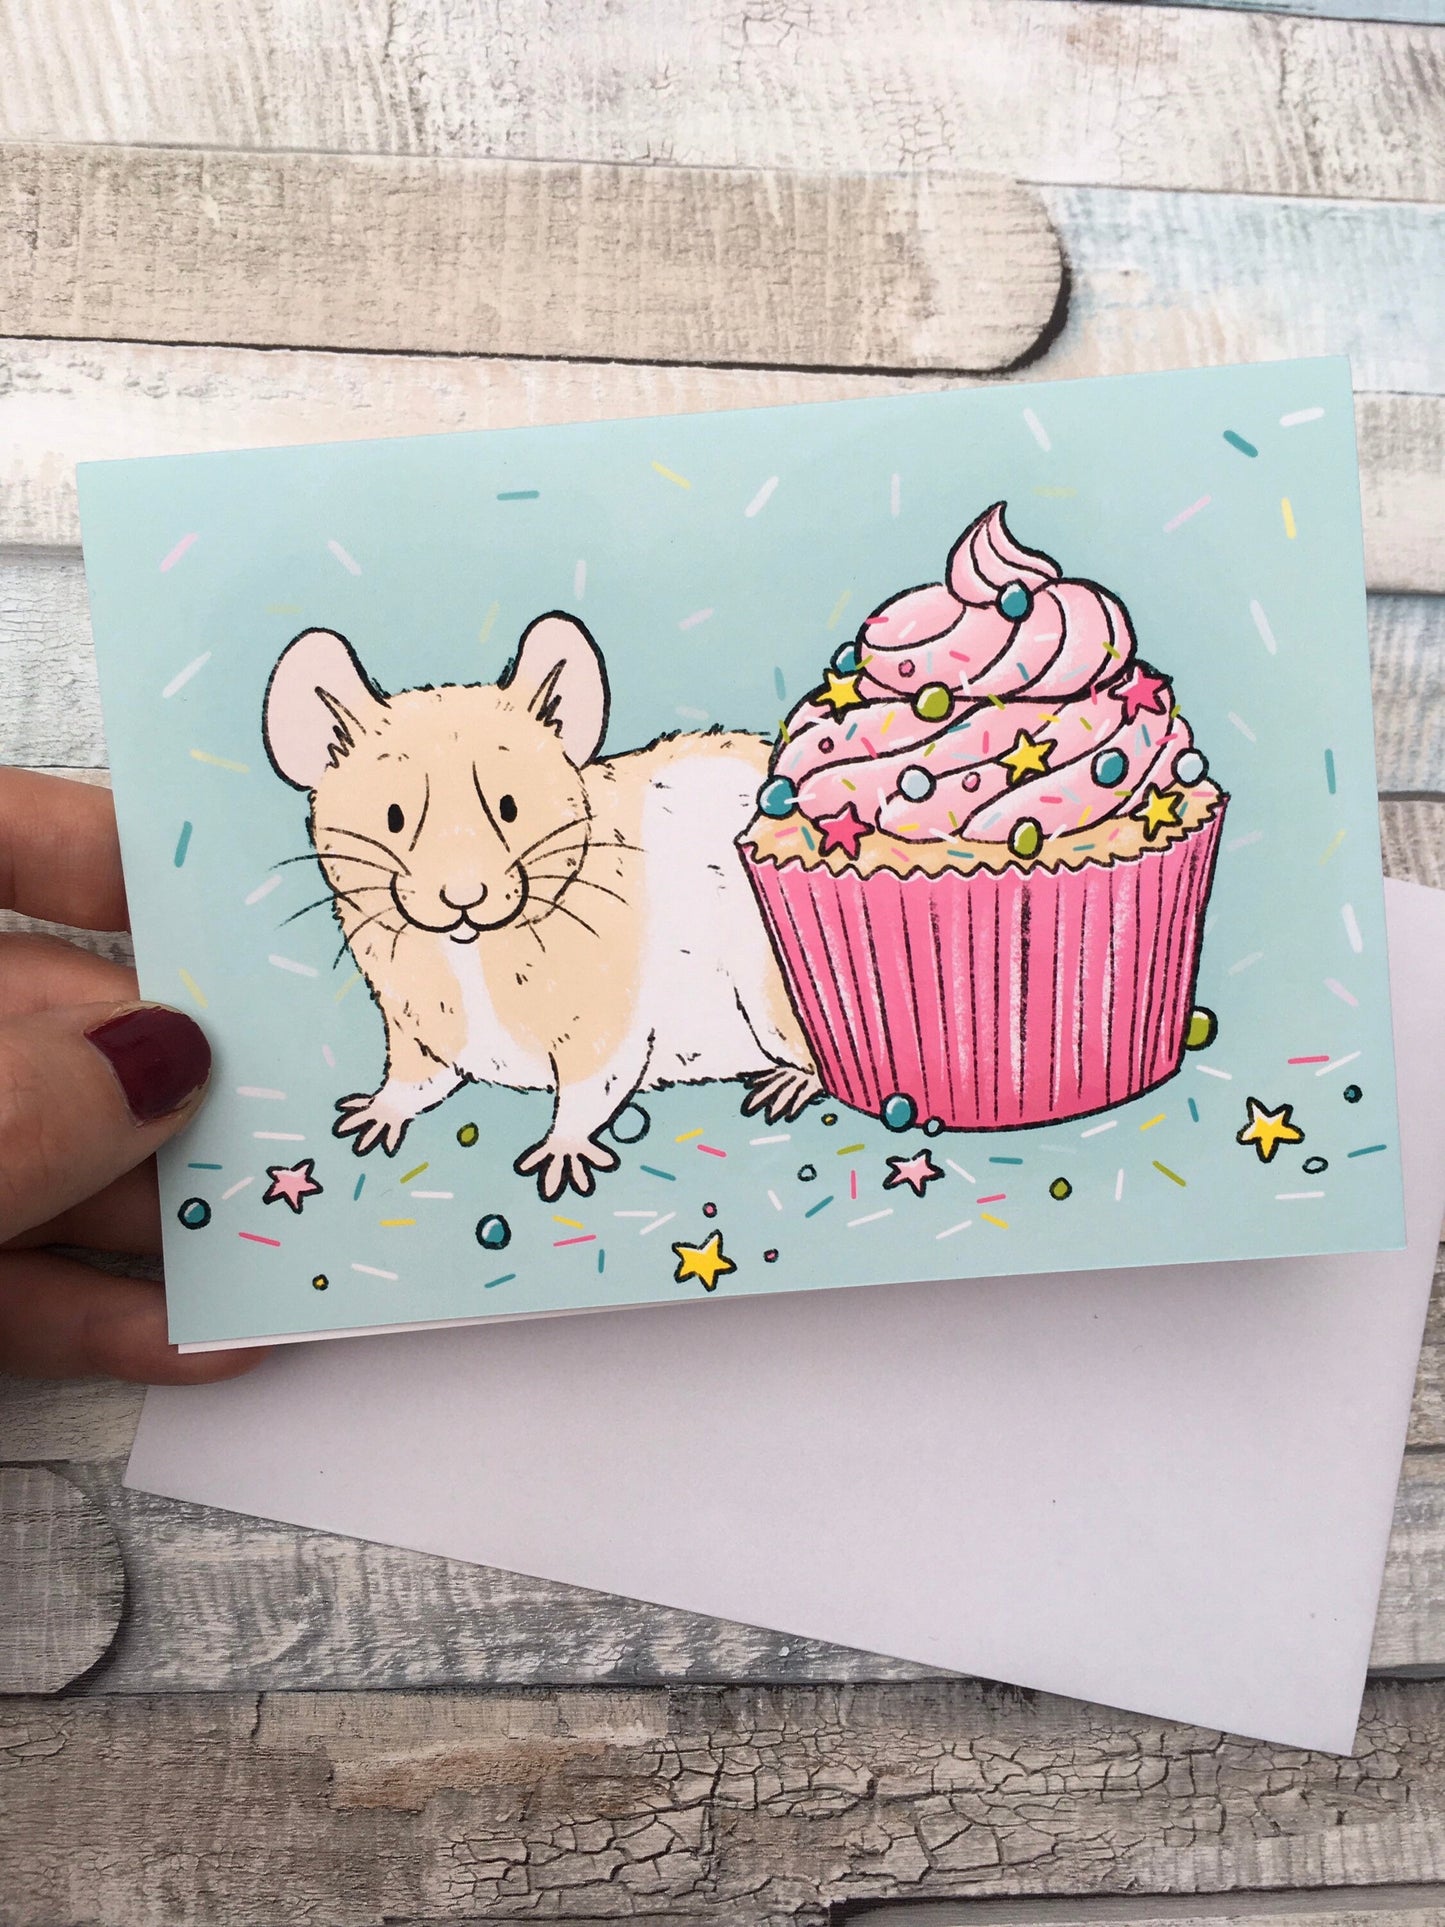 Hamster Cupcake Celebration Greeting Card - A6 Size Greeting Card With White Envelope - Cute Hamster Birthday Card